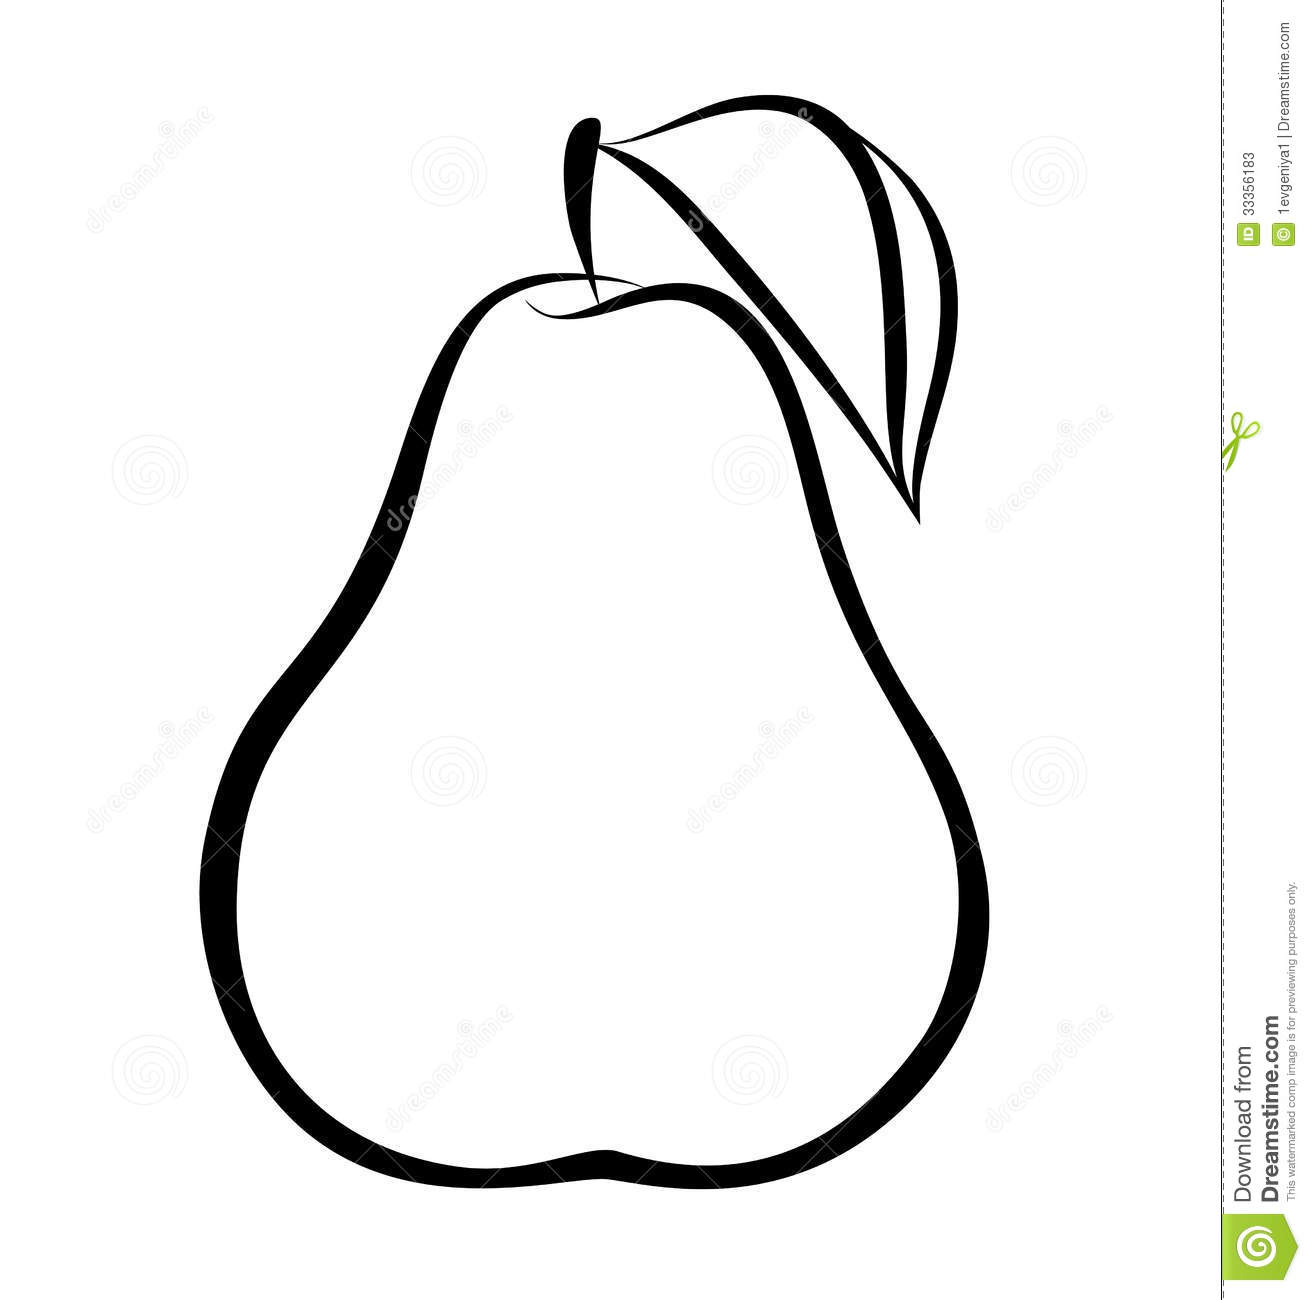 pear clipart black and white